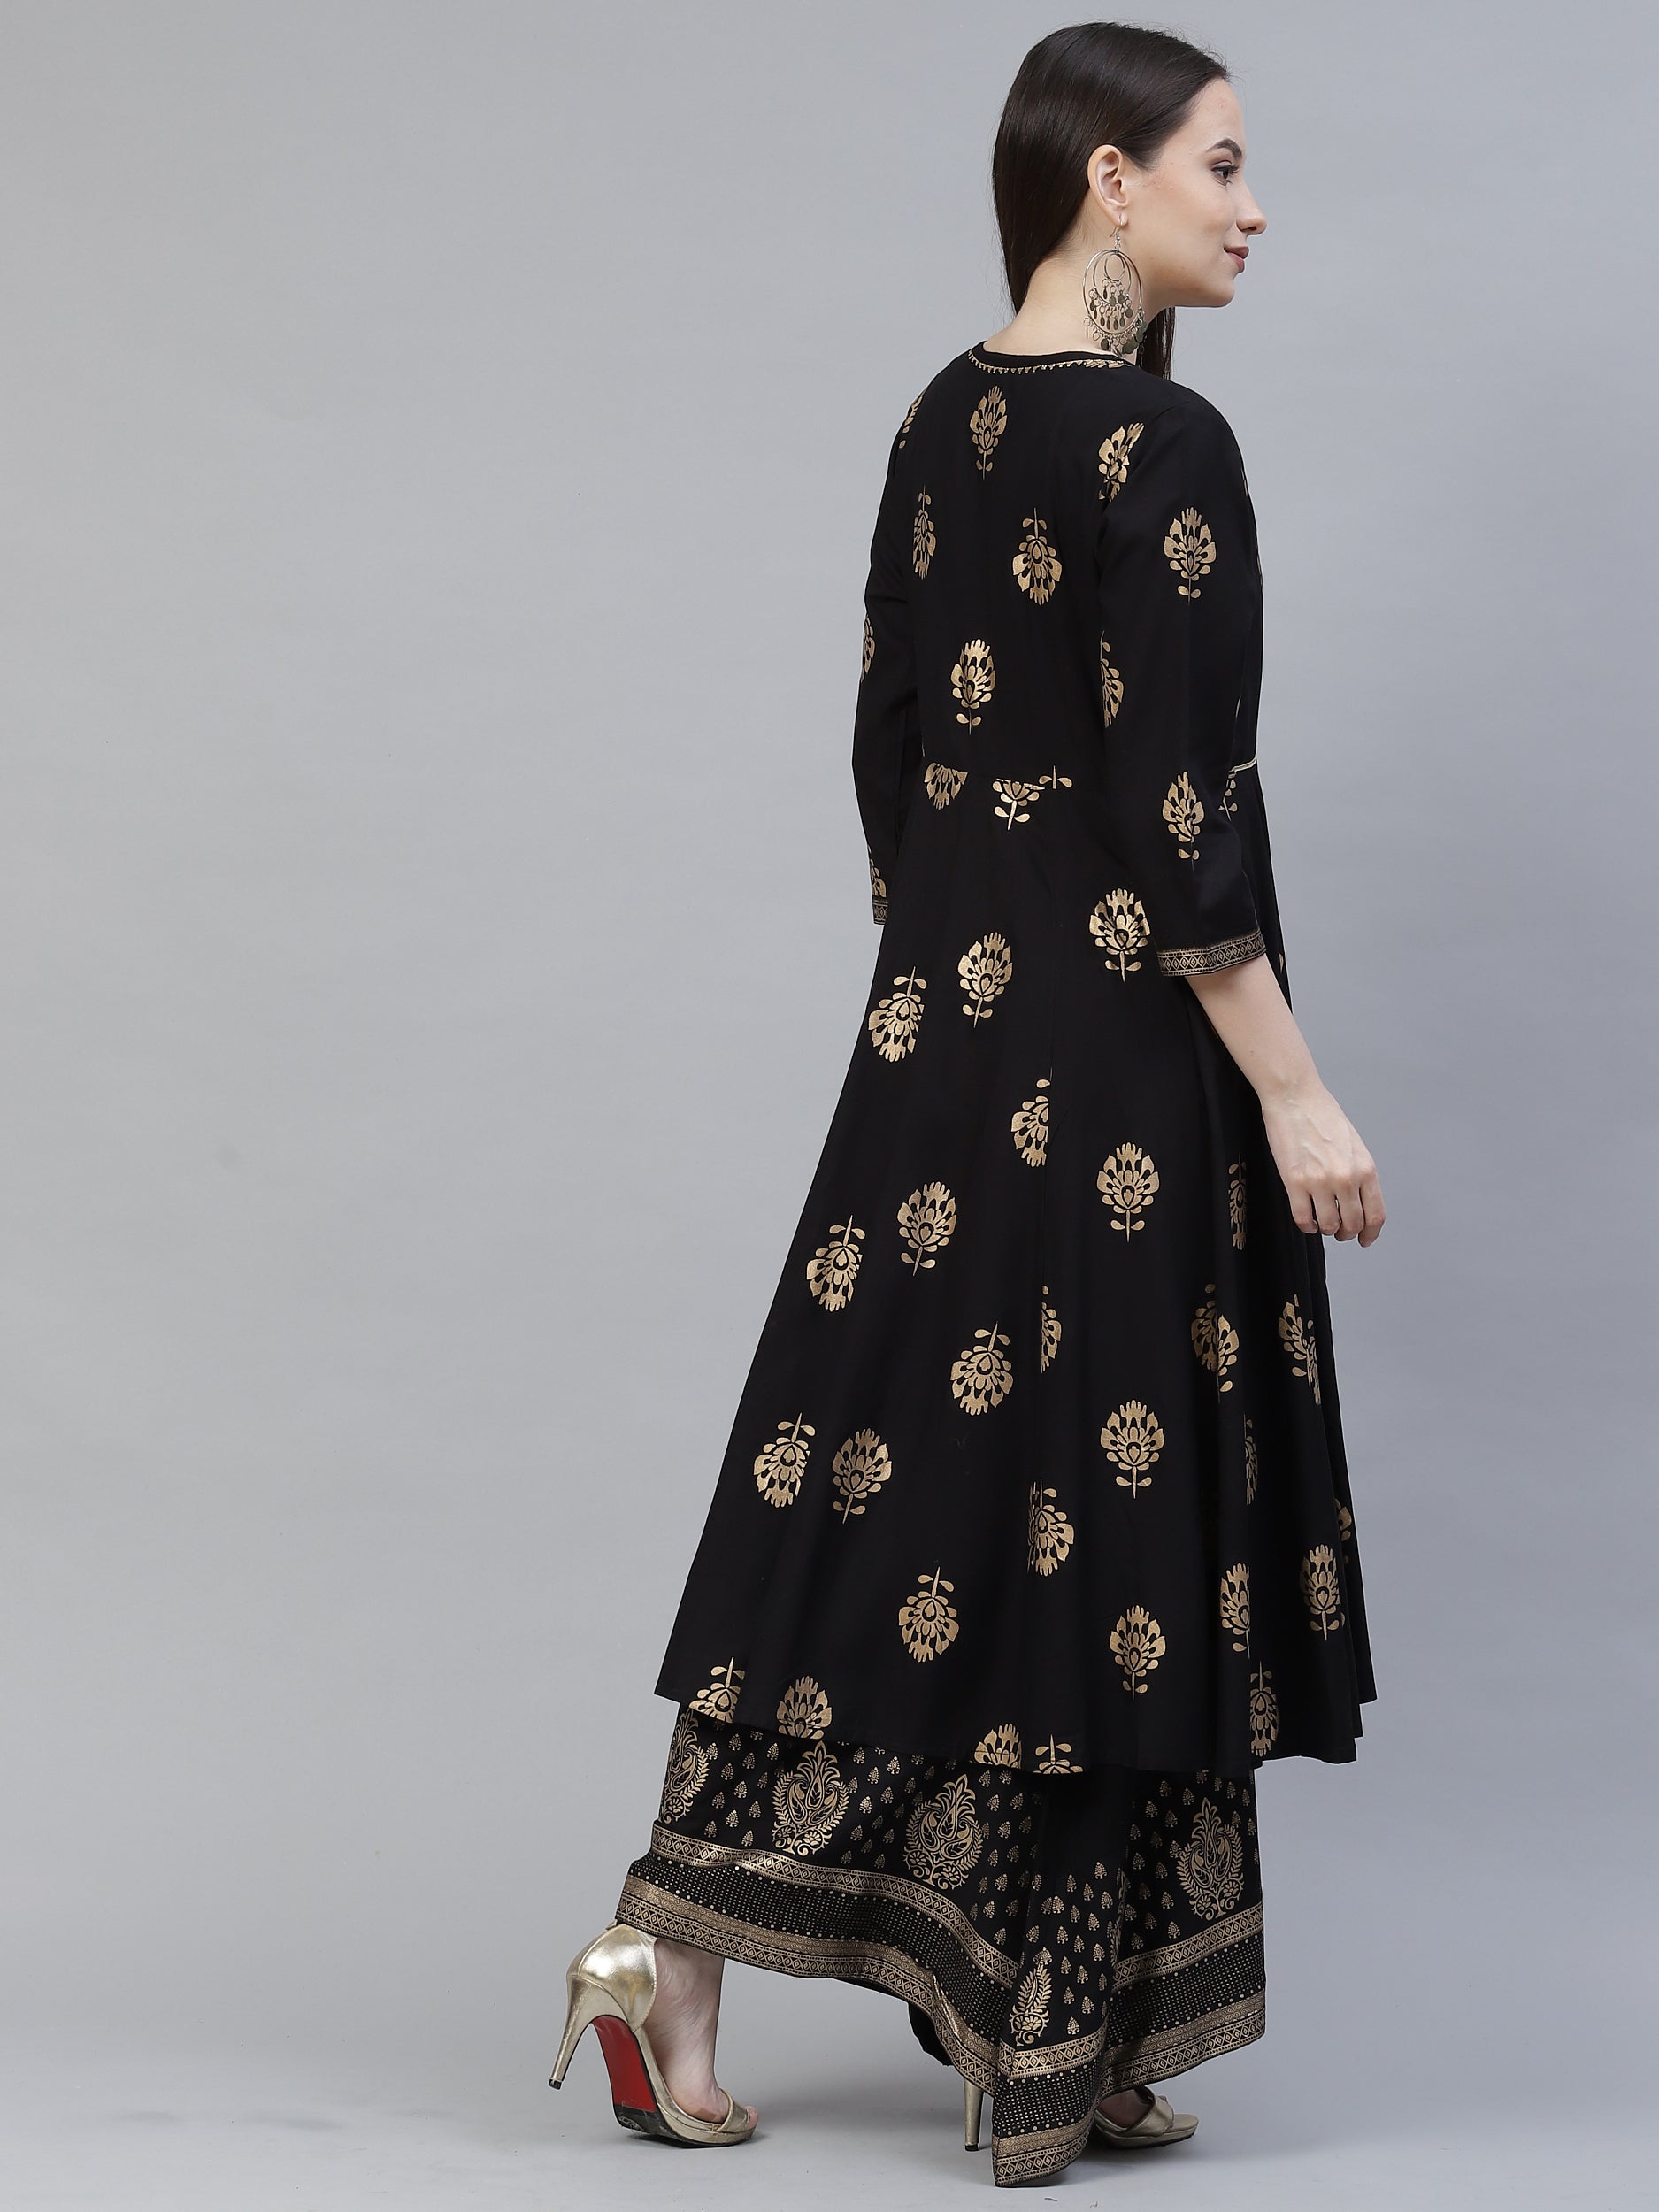 Women's black and gold printed flared dress - Meeranshi